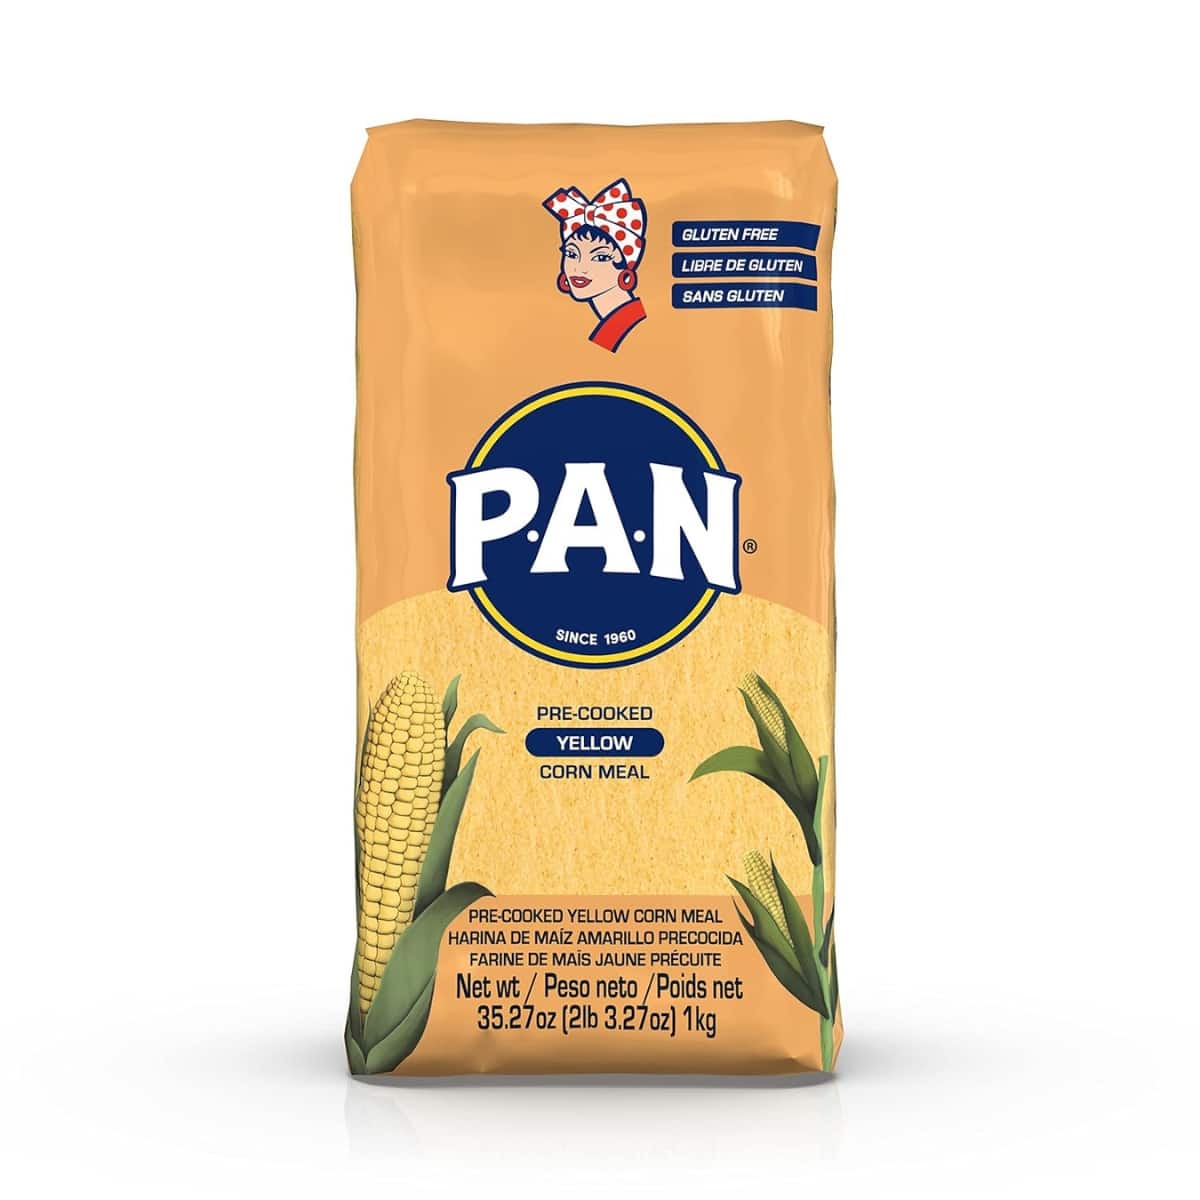 Buy PAN Yellow Corn Meal (Pre-Cooked) - 1 kg